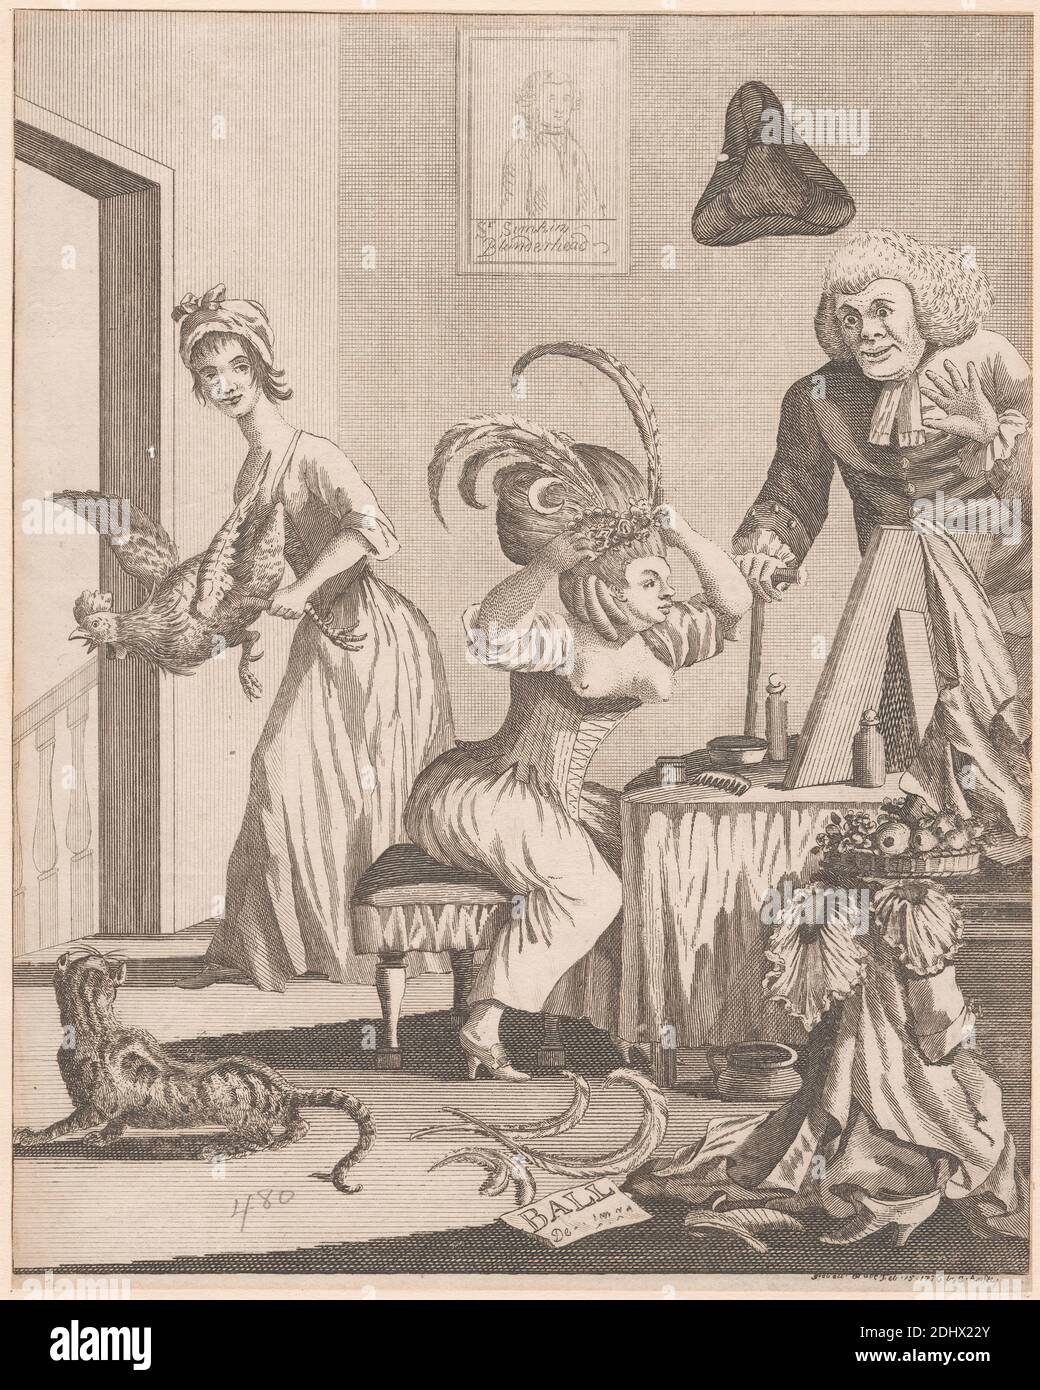 Lady Preparing for Evening at a Ball, unknown artist, 1776, Engraving in brown ink Stock Photo